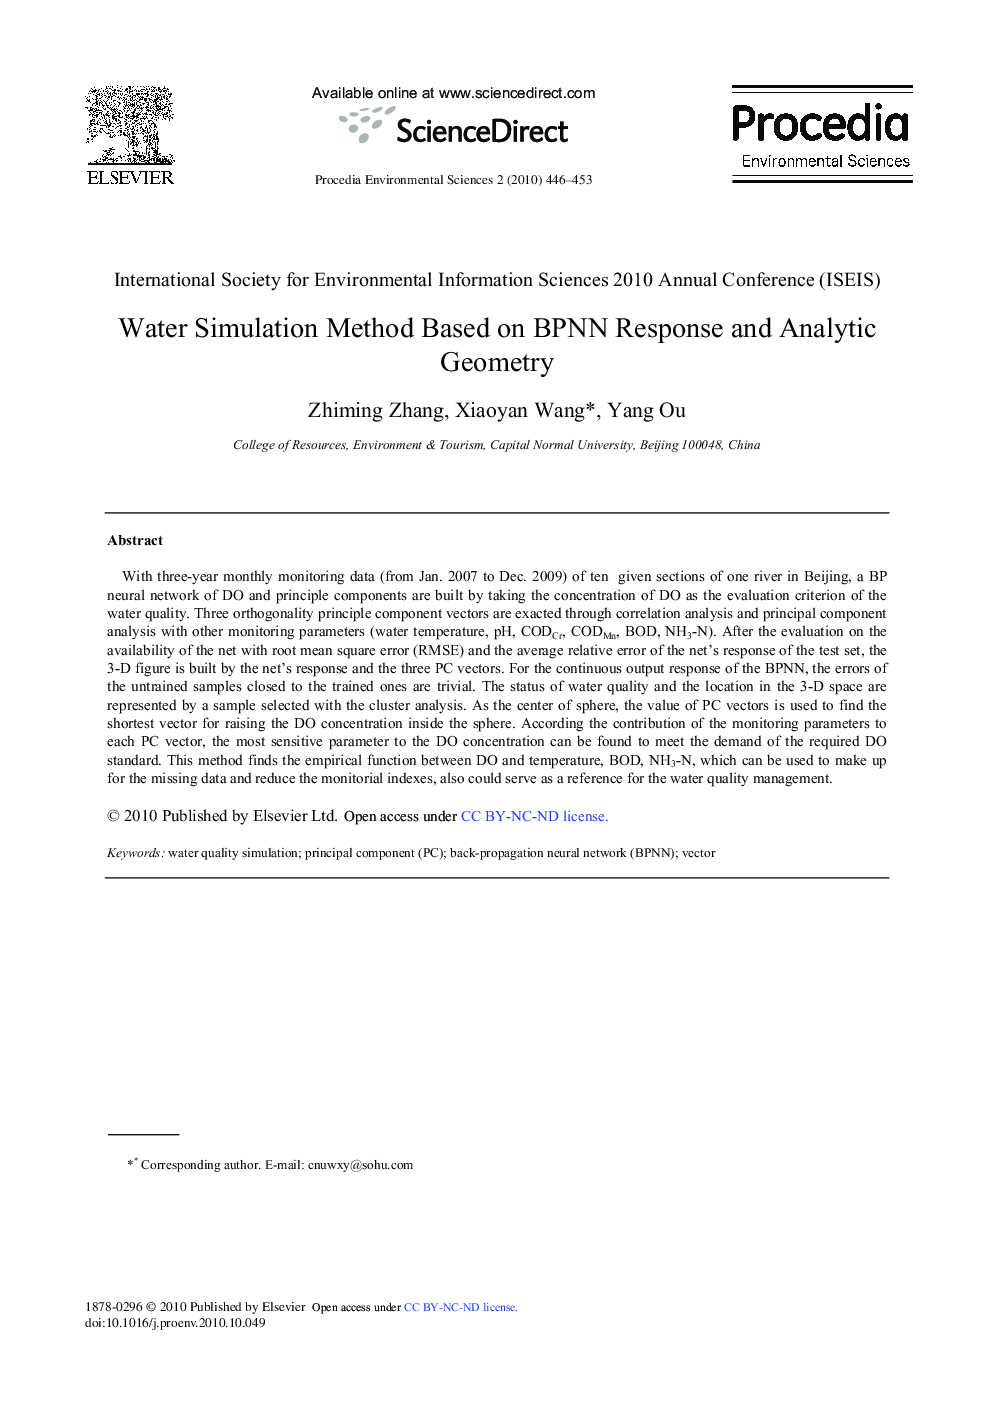 Water Simulation Method Based on BPNN Response and Analytic Geometry